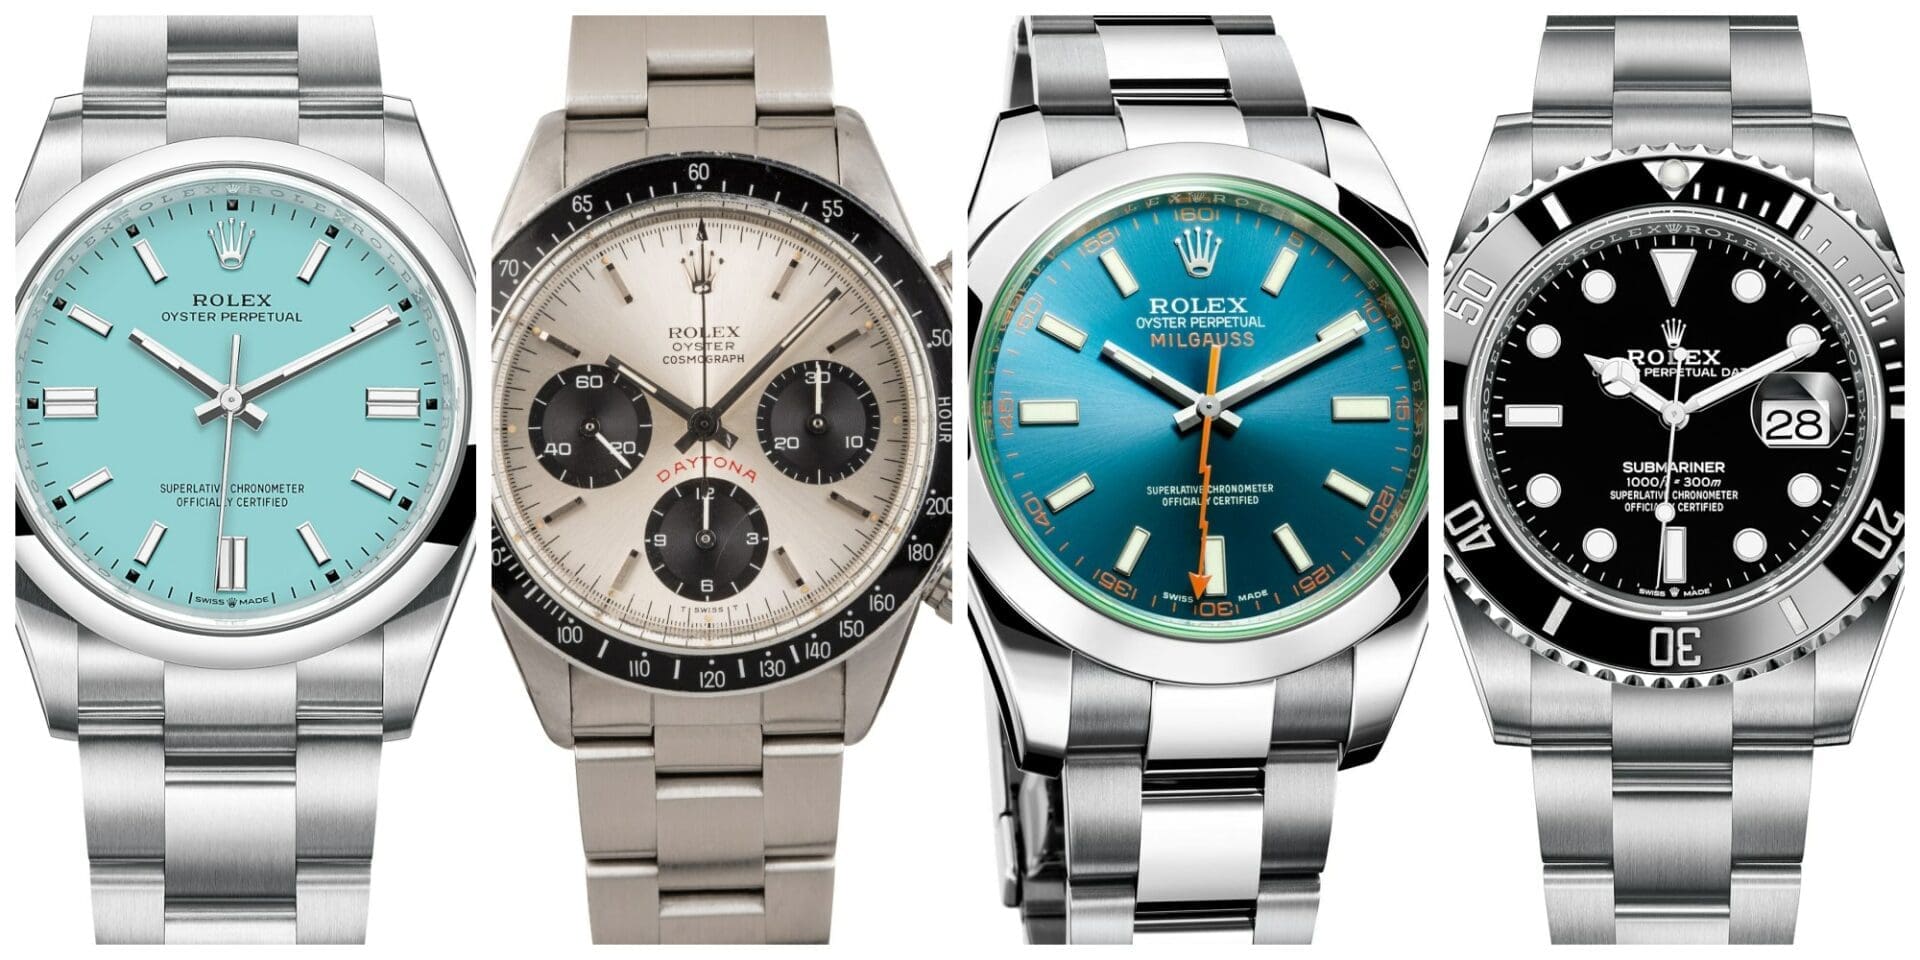 We’ve found a sure-fire way to get a Rolex on your wrist (sort of…)